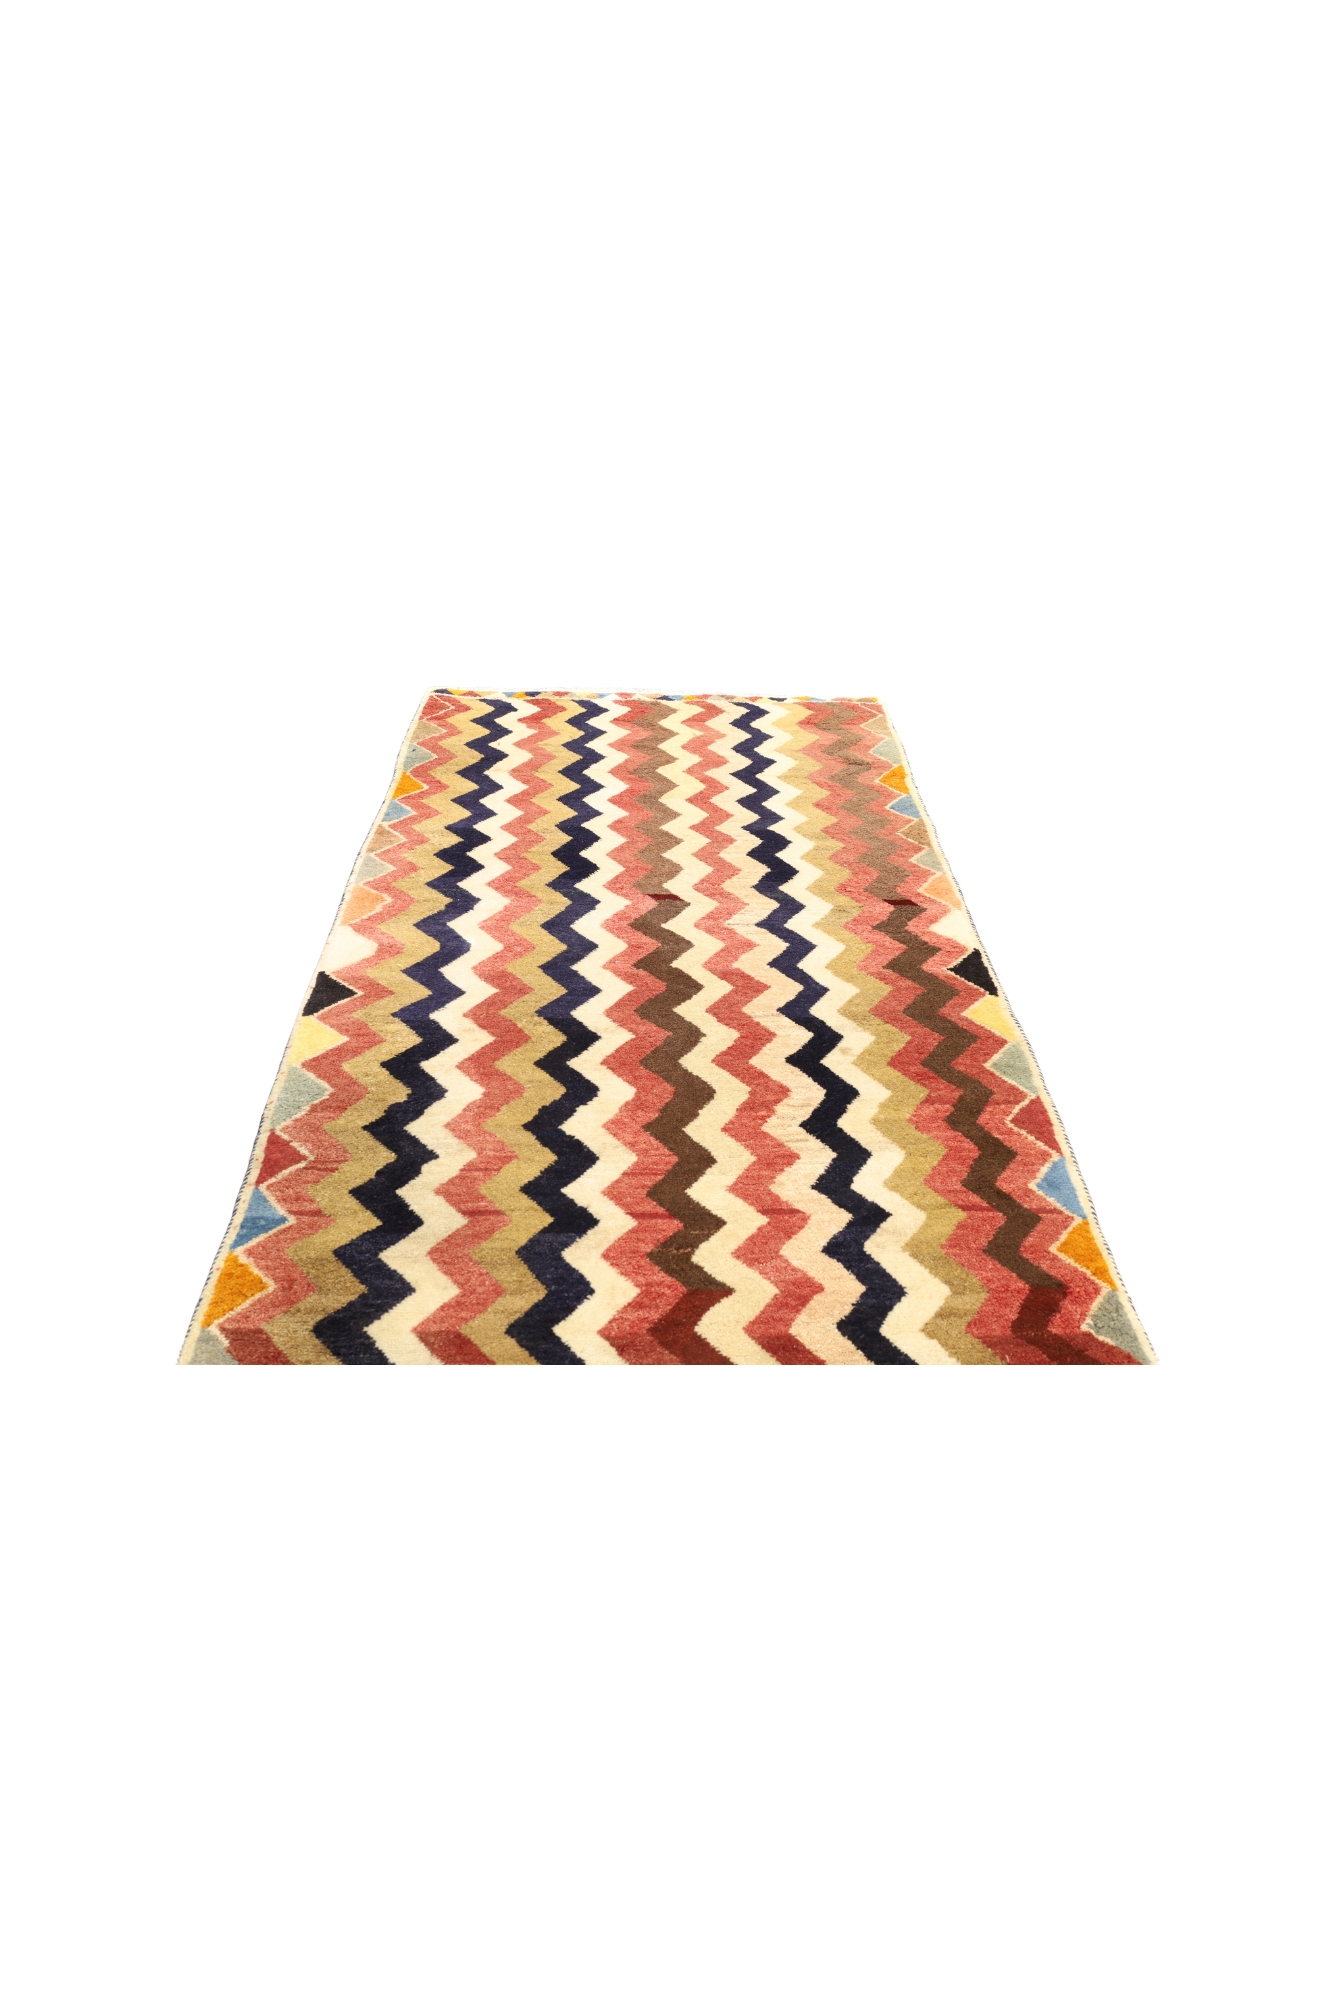 Three modern multi-coloured woolen rugs from tribal rugs Ltd, 175 x 113cm, 182 x 103cm and 165 x ... - Image 2 of 9